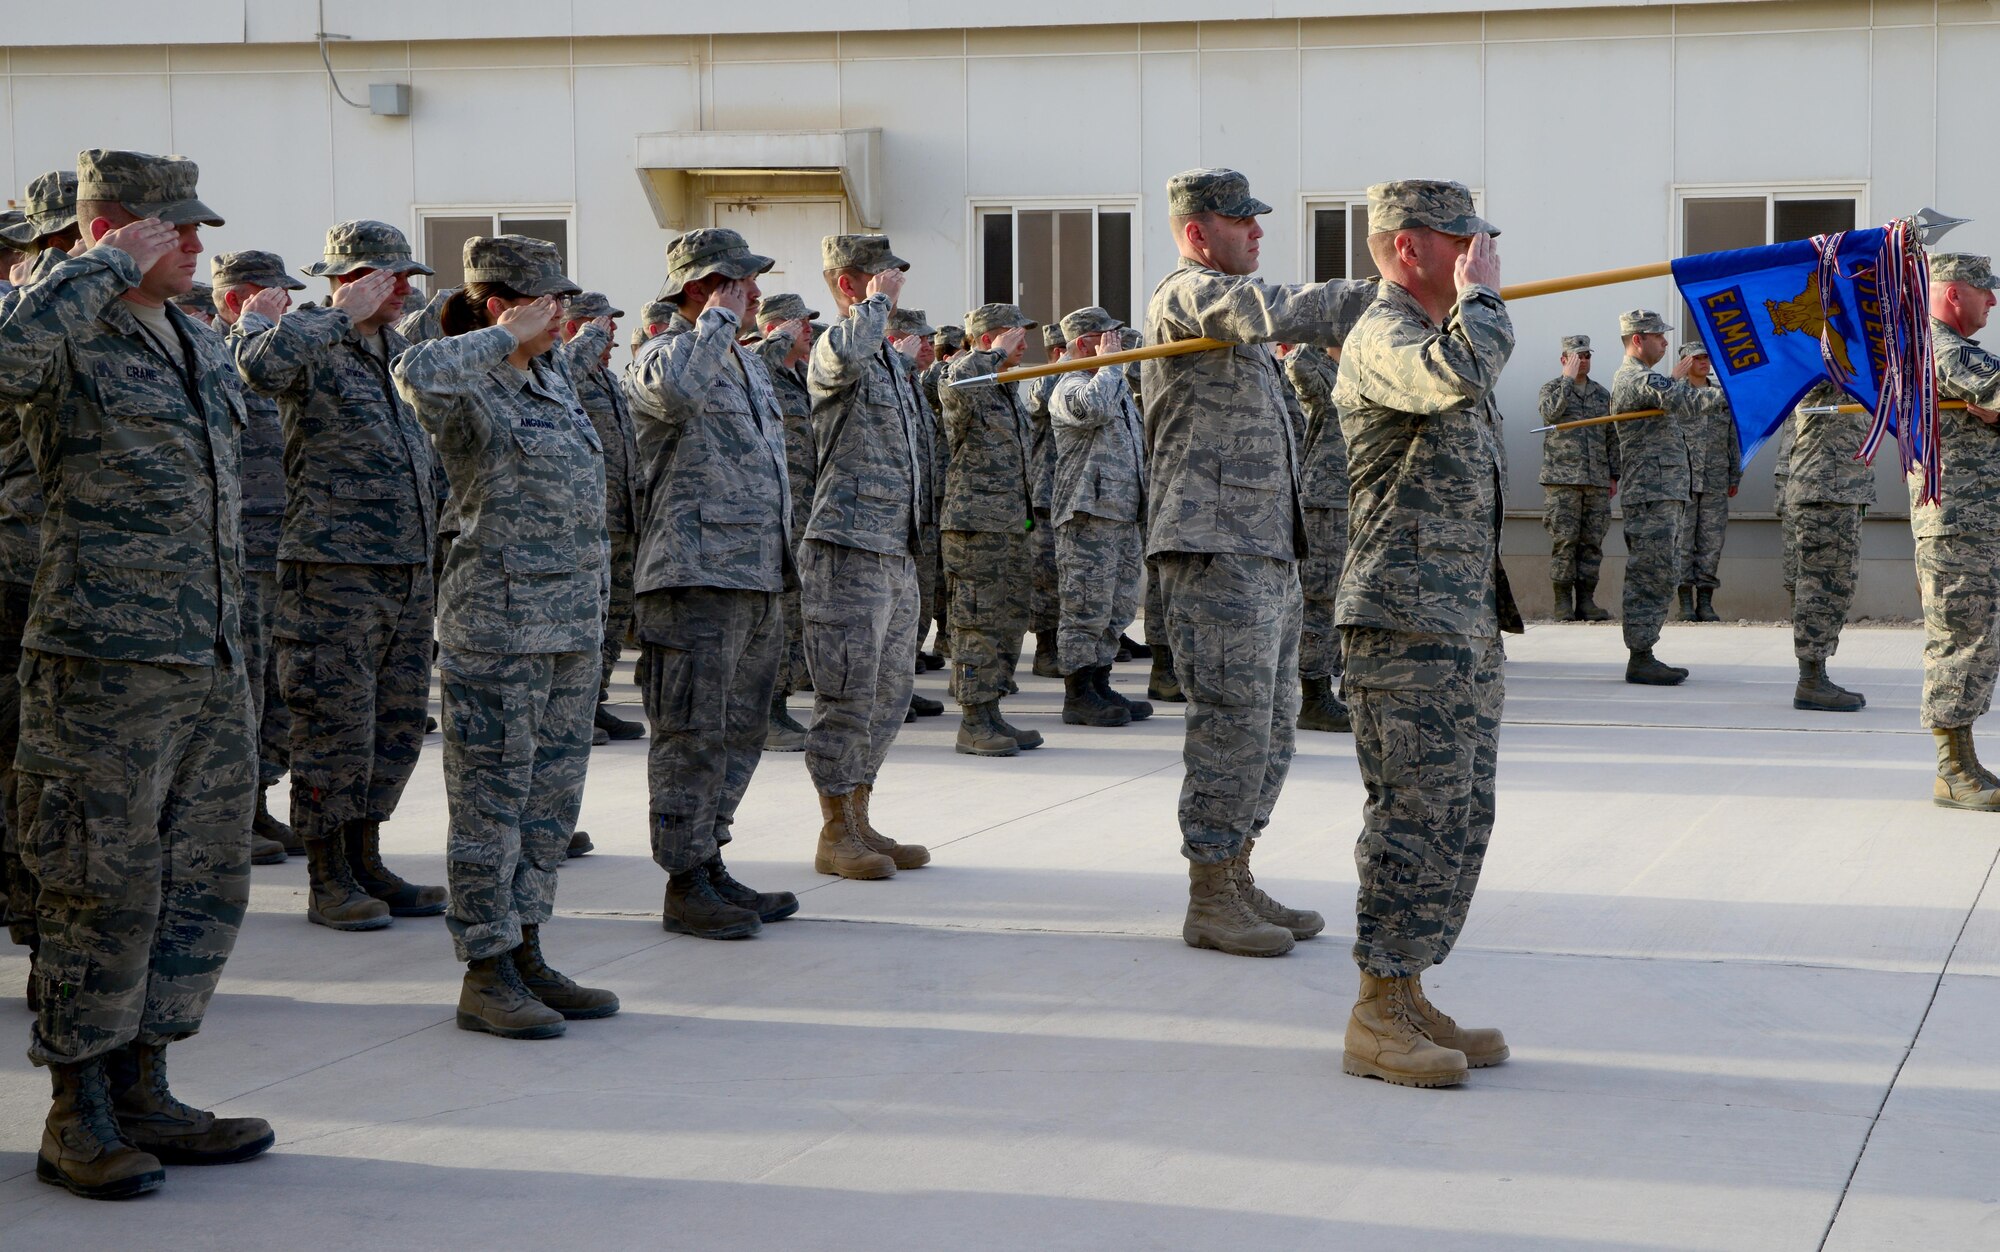 U.S. Air Force Airmen from the 379th Expeditionary Maintenance Group salute the U.S. flag while in formation during a Washington’s Birthday retreat Ceremony, Feb. 16, 2015, at Al Udeid Air Base, Qatar. Washington’s Birthday, also known as President’s Day, has been a federally recognized holiday since 1879. Contrary to popular belief, the act neither combined the birthday celebrations for Presidents George Washington and Abraham Lincoln nor actually changed the holiday’s official name to Presidents Day. (U.S. Air Force photo by Senior Airman Kia Atkins)